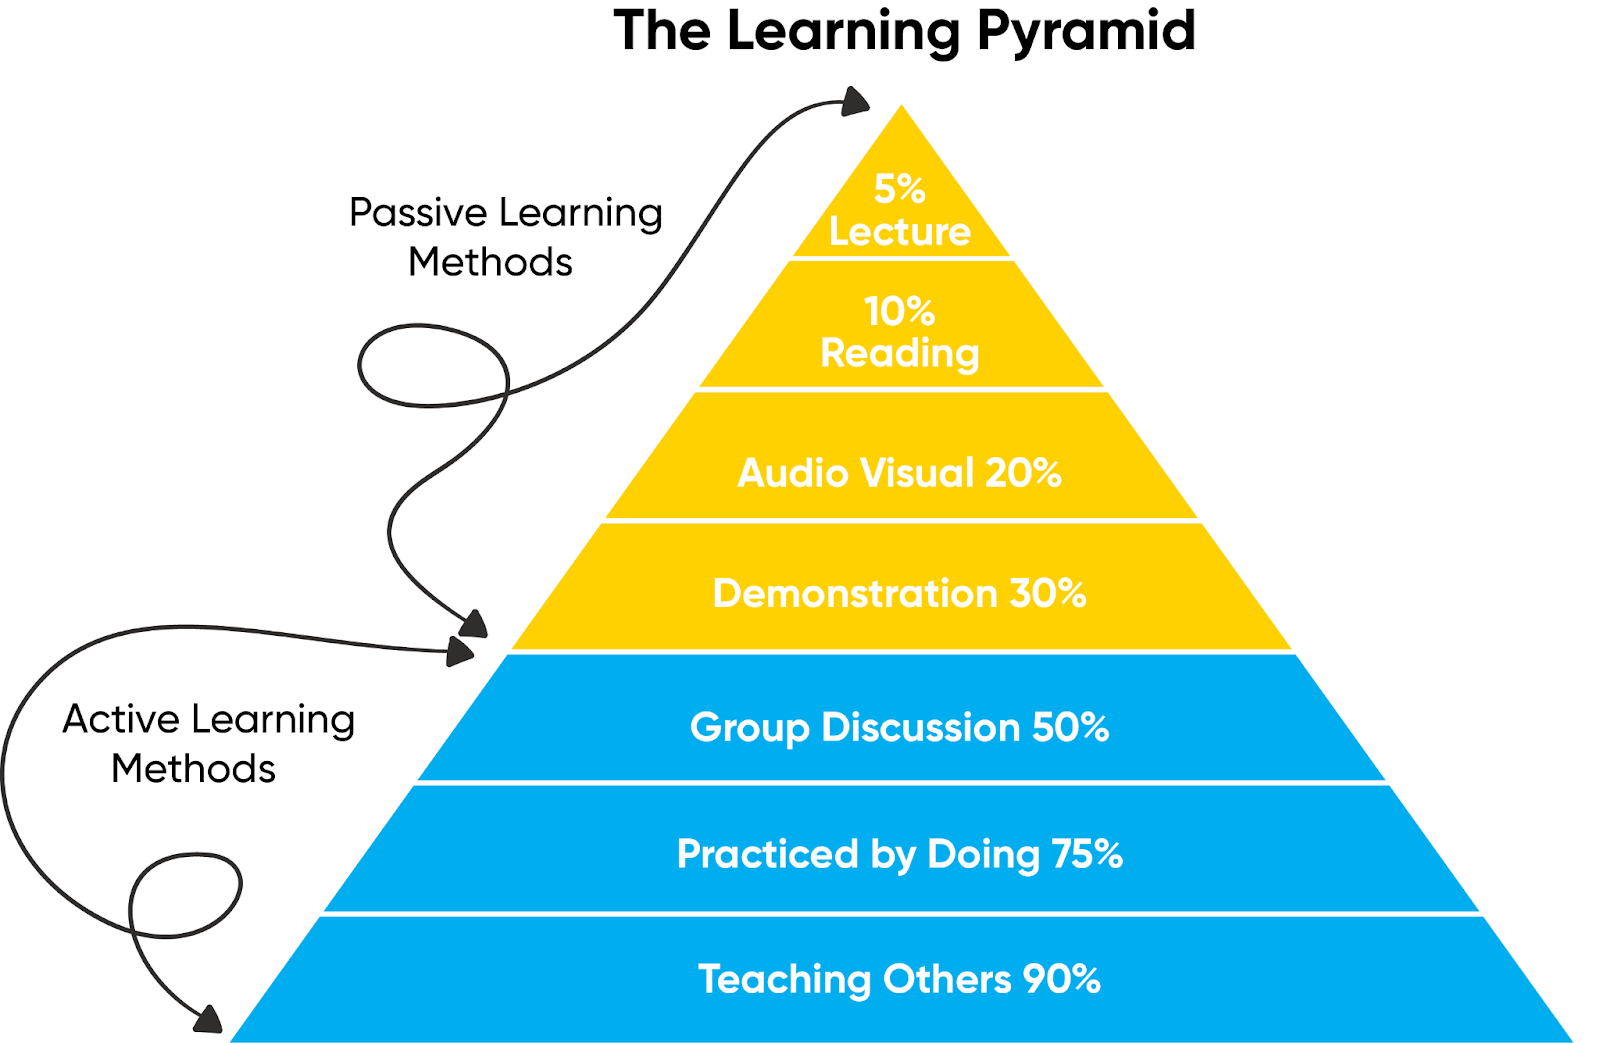 What Is The Learning Pyramid Model?